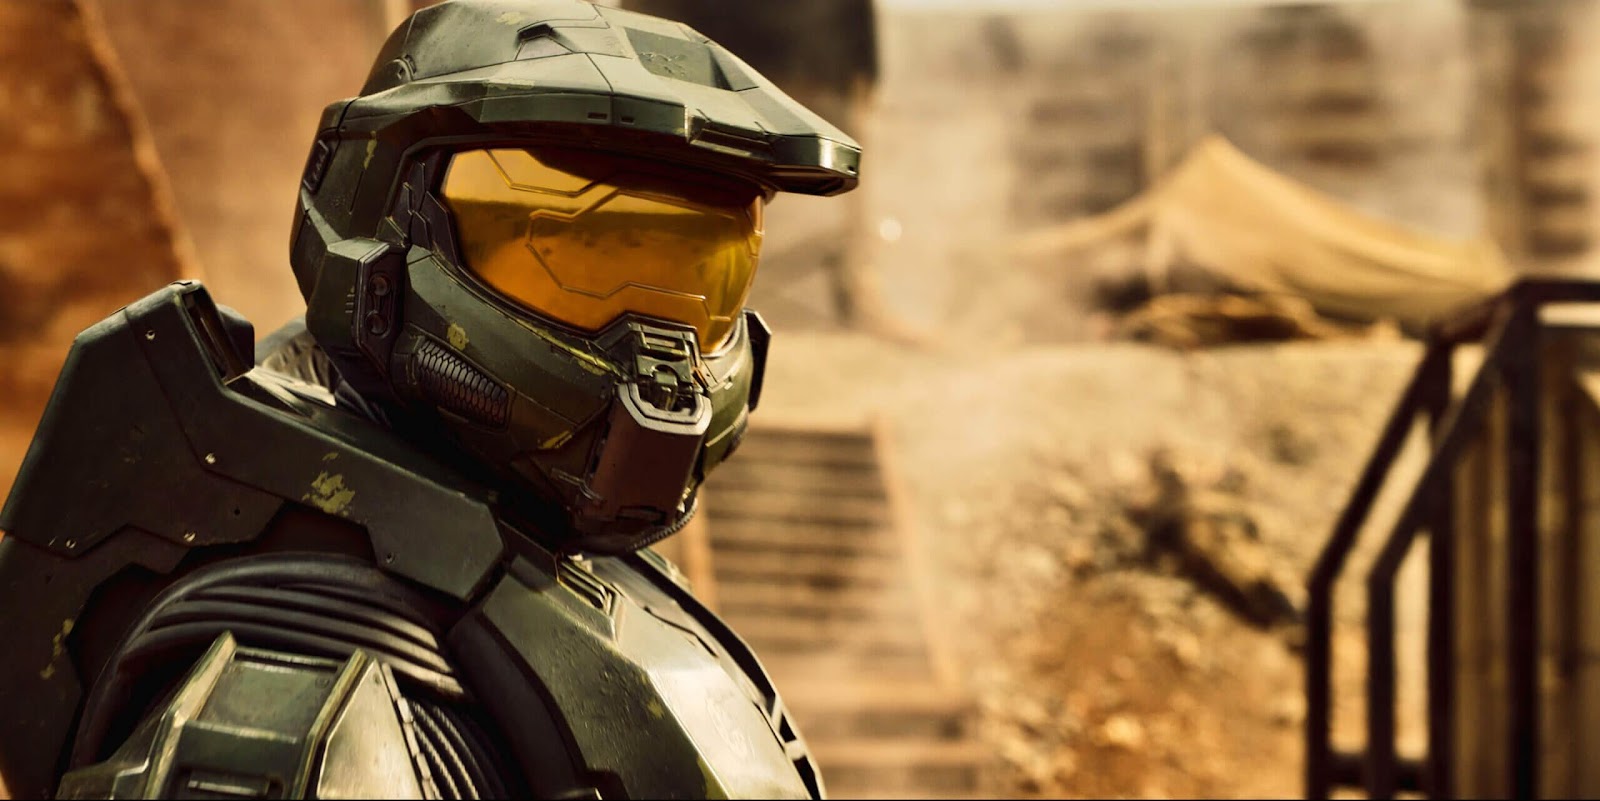 Master Chief in the new Halo series.